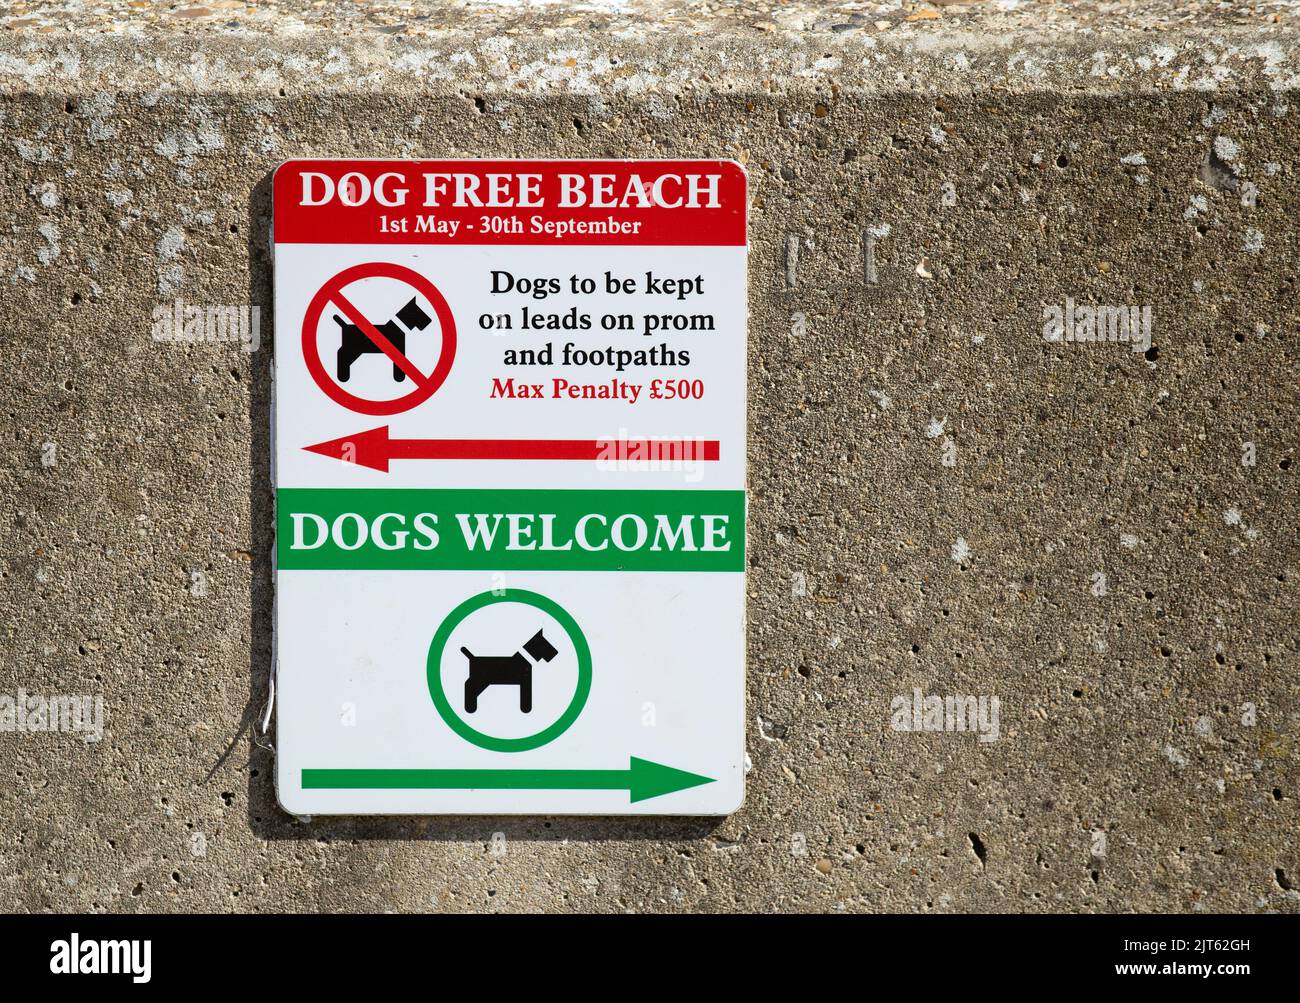 Clacton On Seal Essex, England, July 3rd 2022, a sign indicates which areas are to be dog starved on the beach. Stock Photo